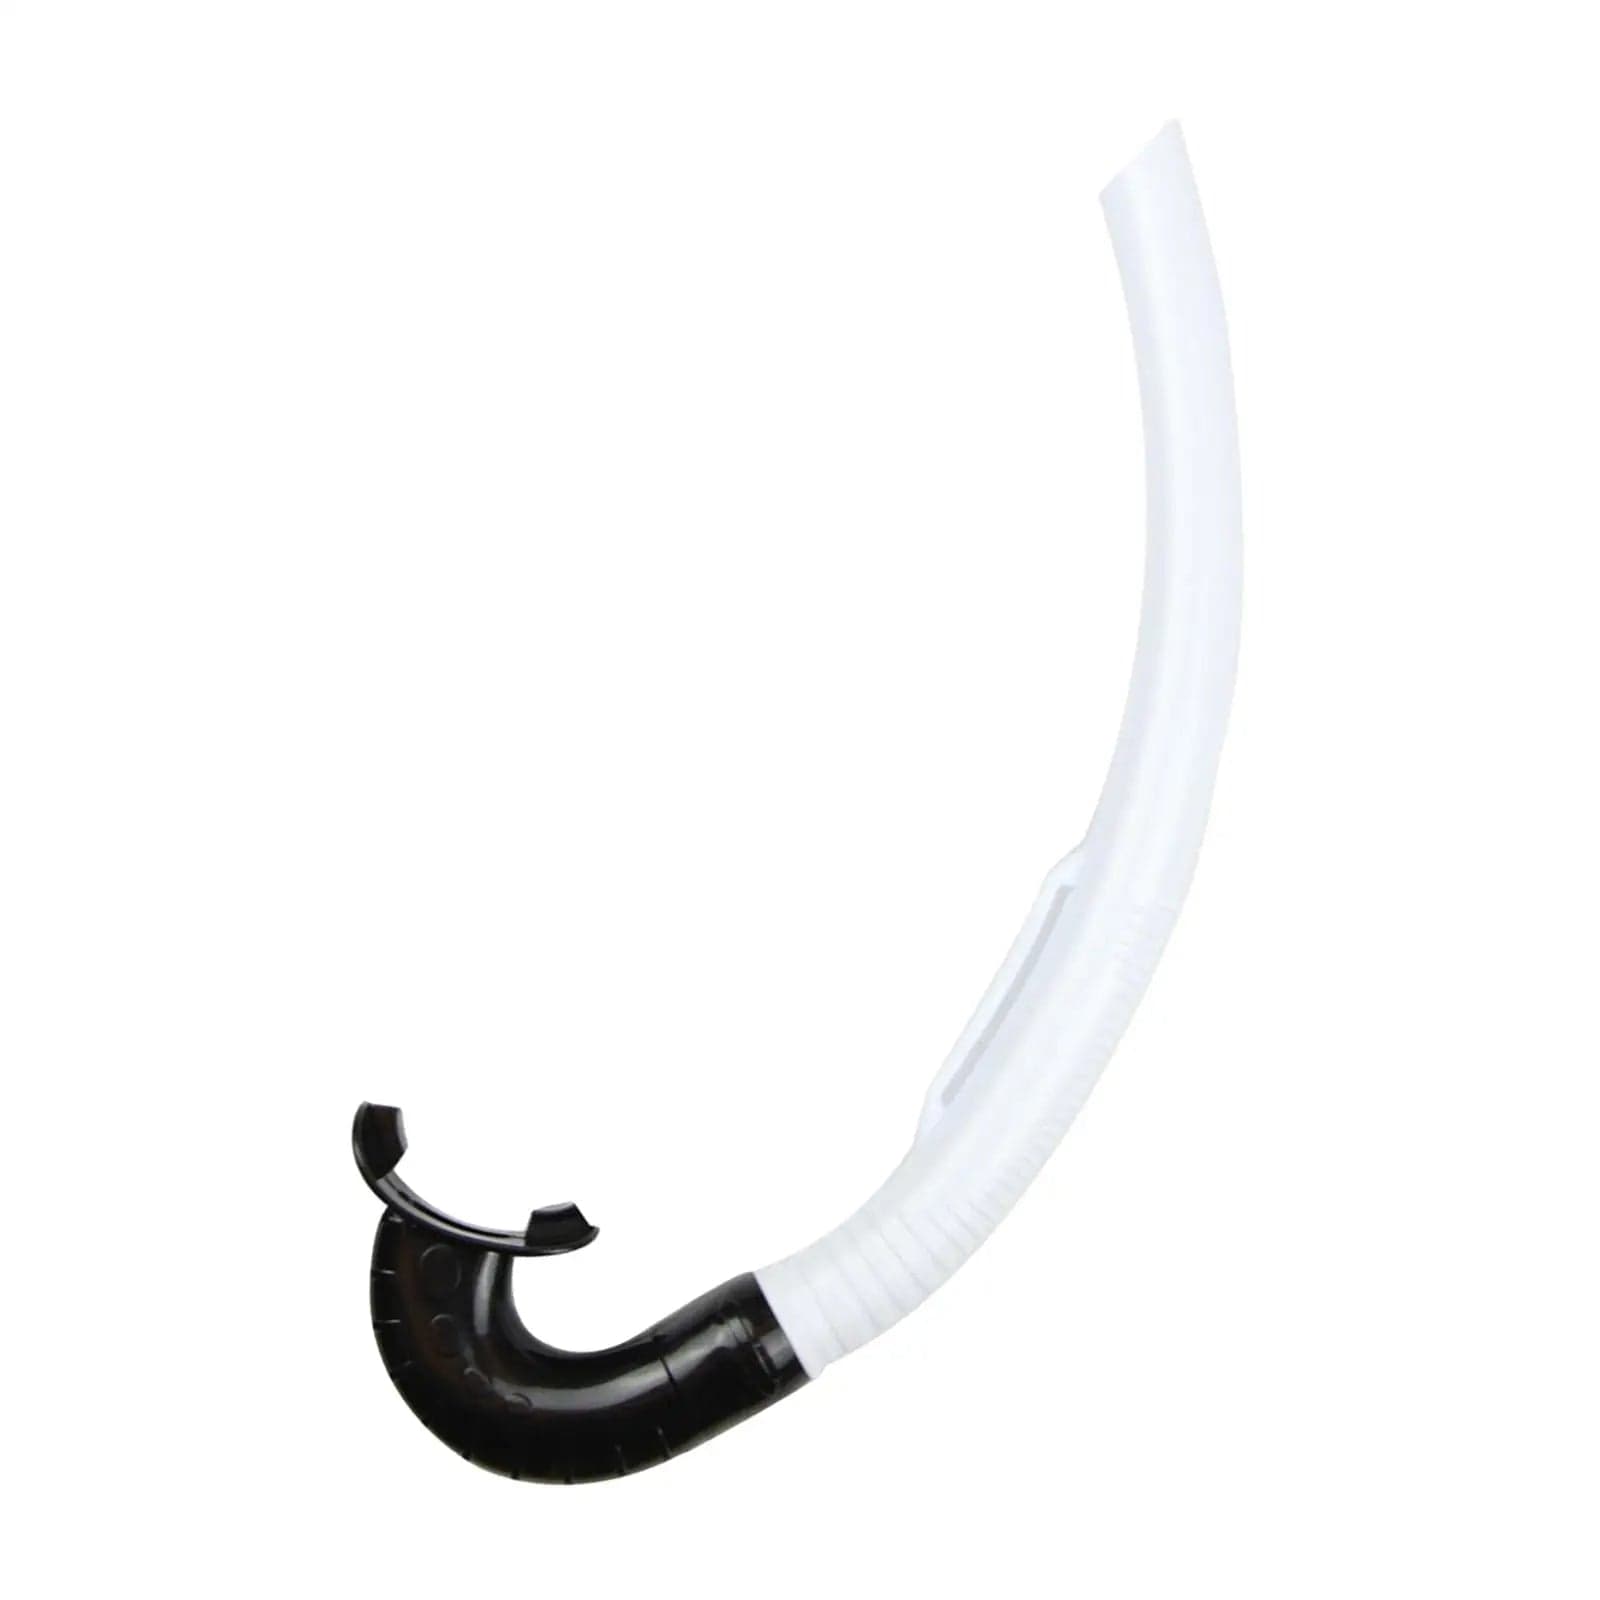 WHITE Dry Snorkel Full Wet Breathing Tube for Adults Facing Forward Scuba Diving